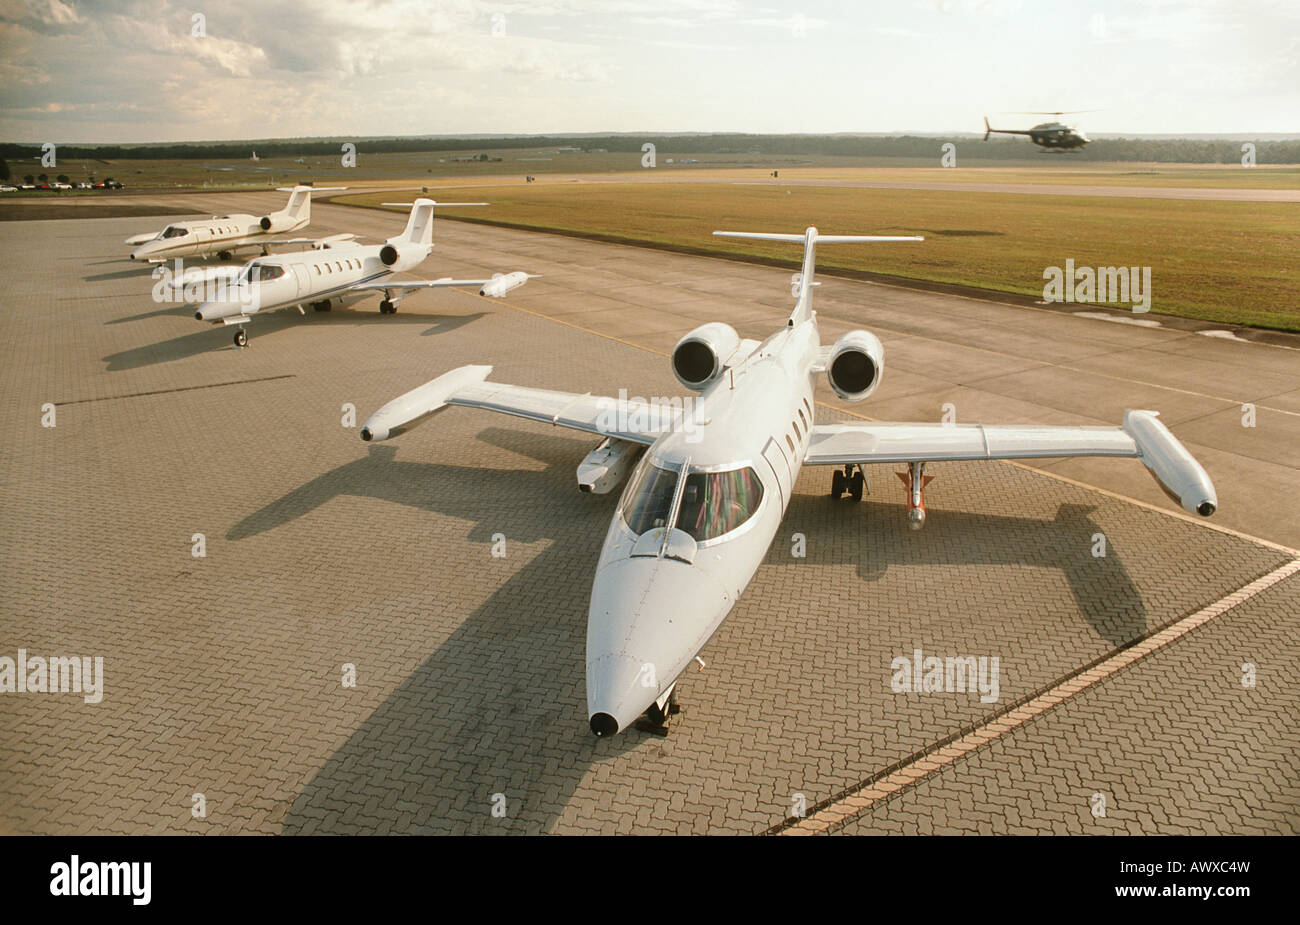 Three jet plains at airport, helicopter in background, elevated view Stock Photo